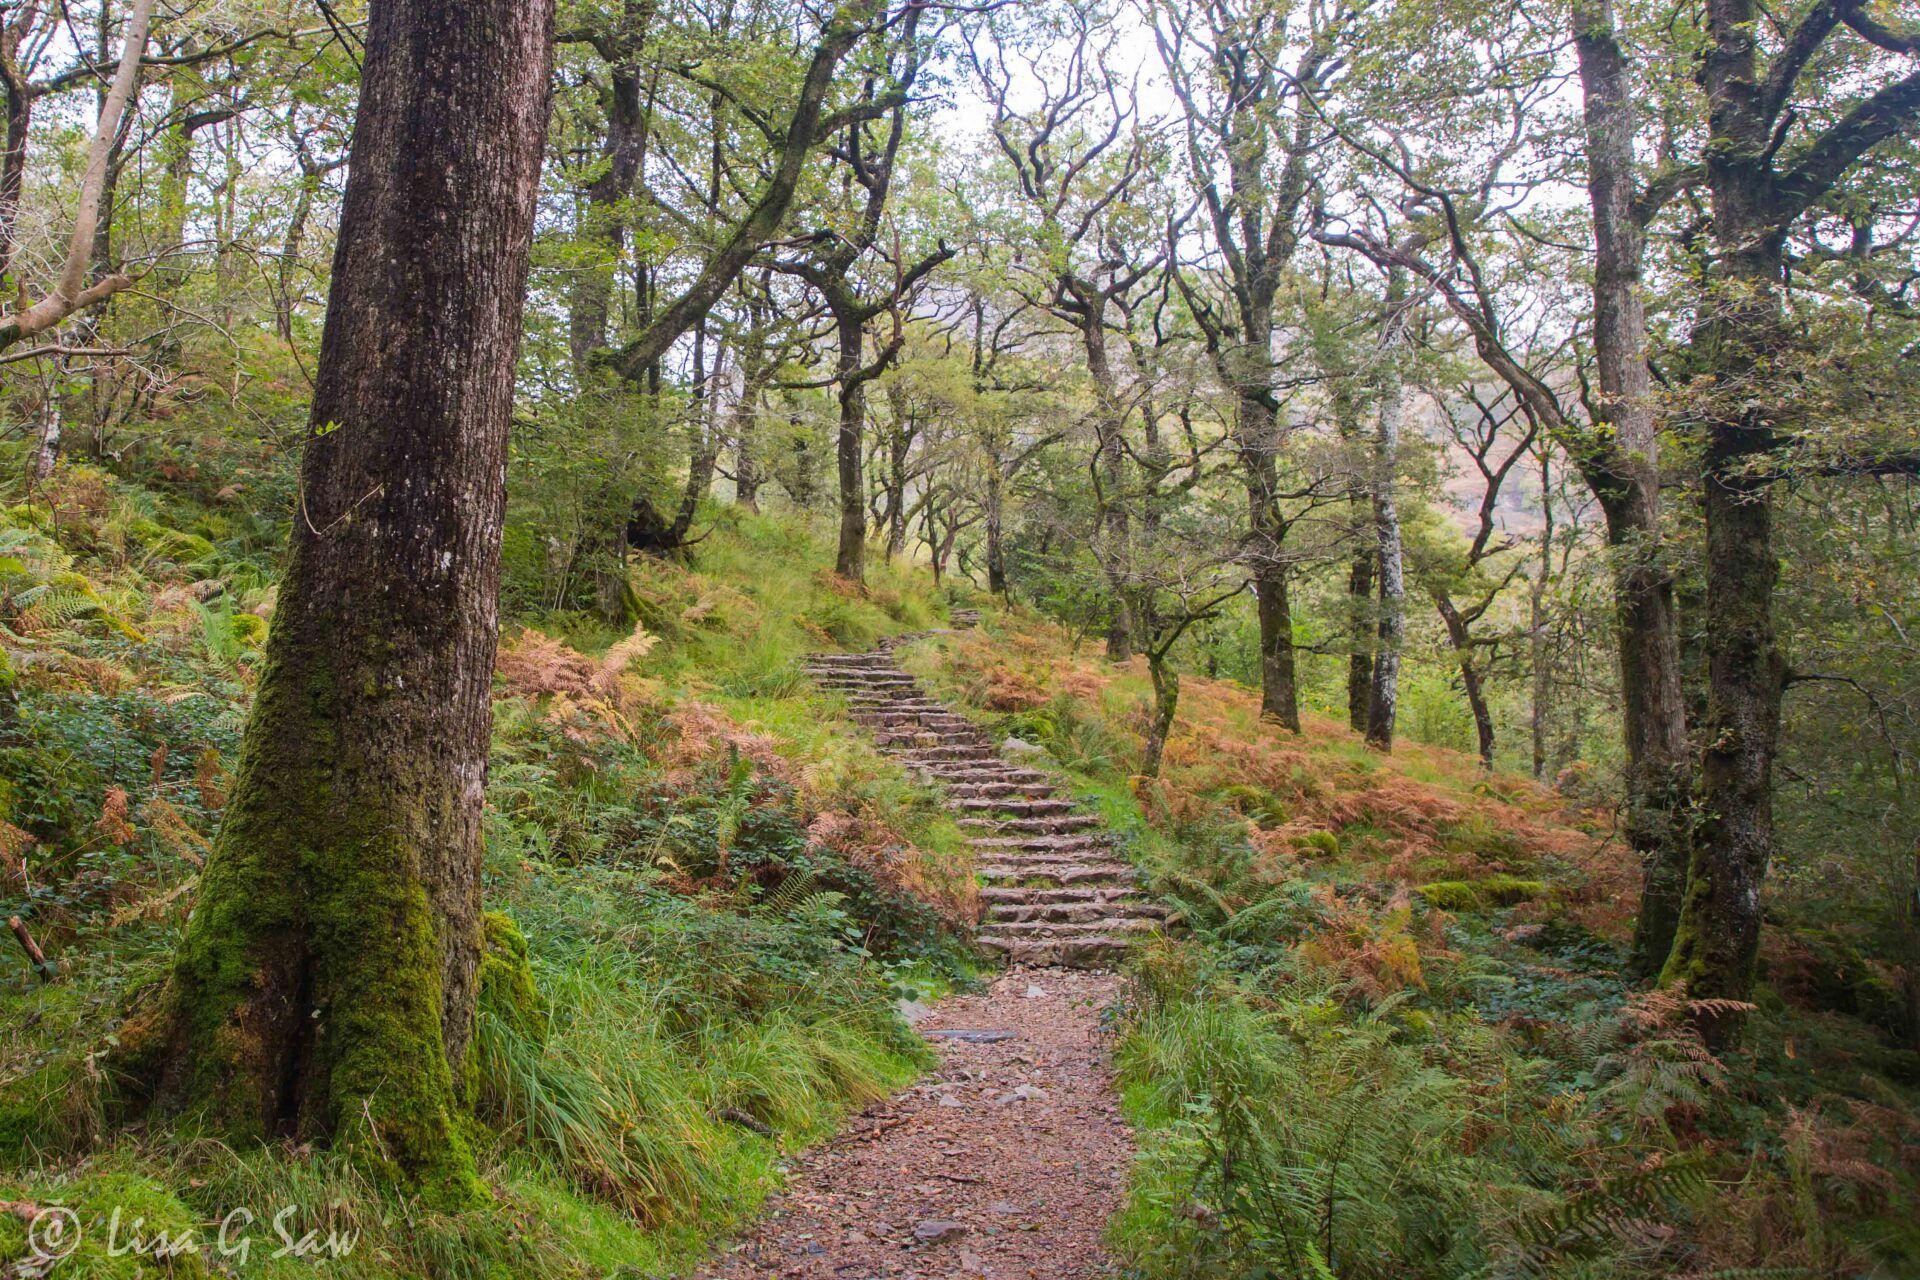 Path and steps through woodland in Snowdonia National Park